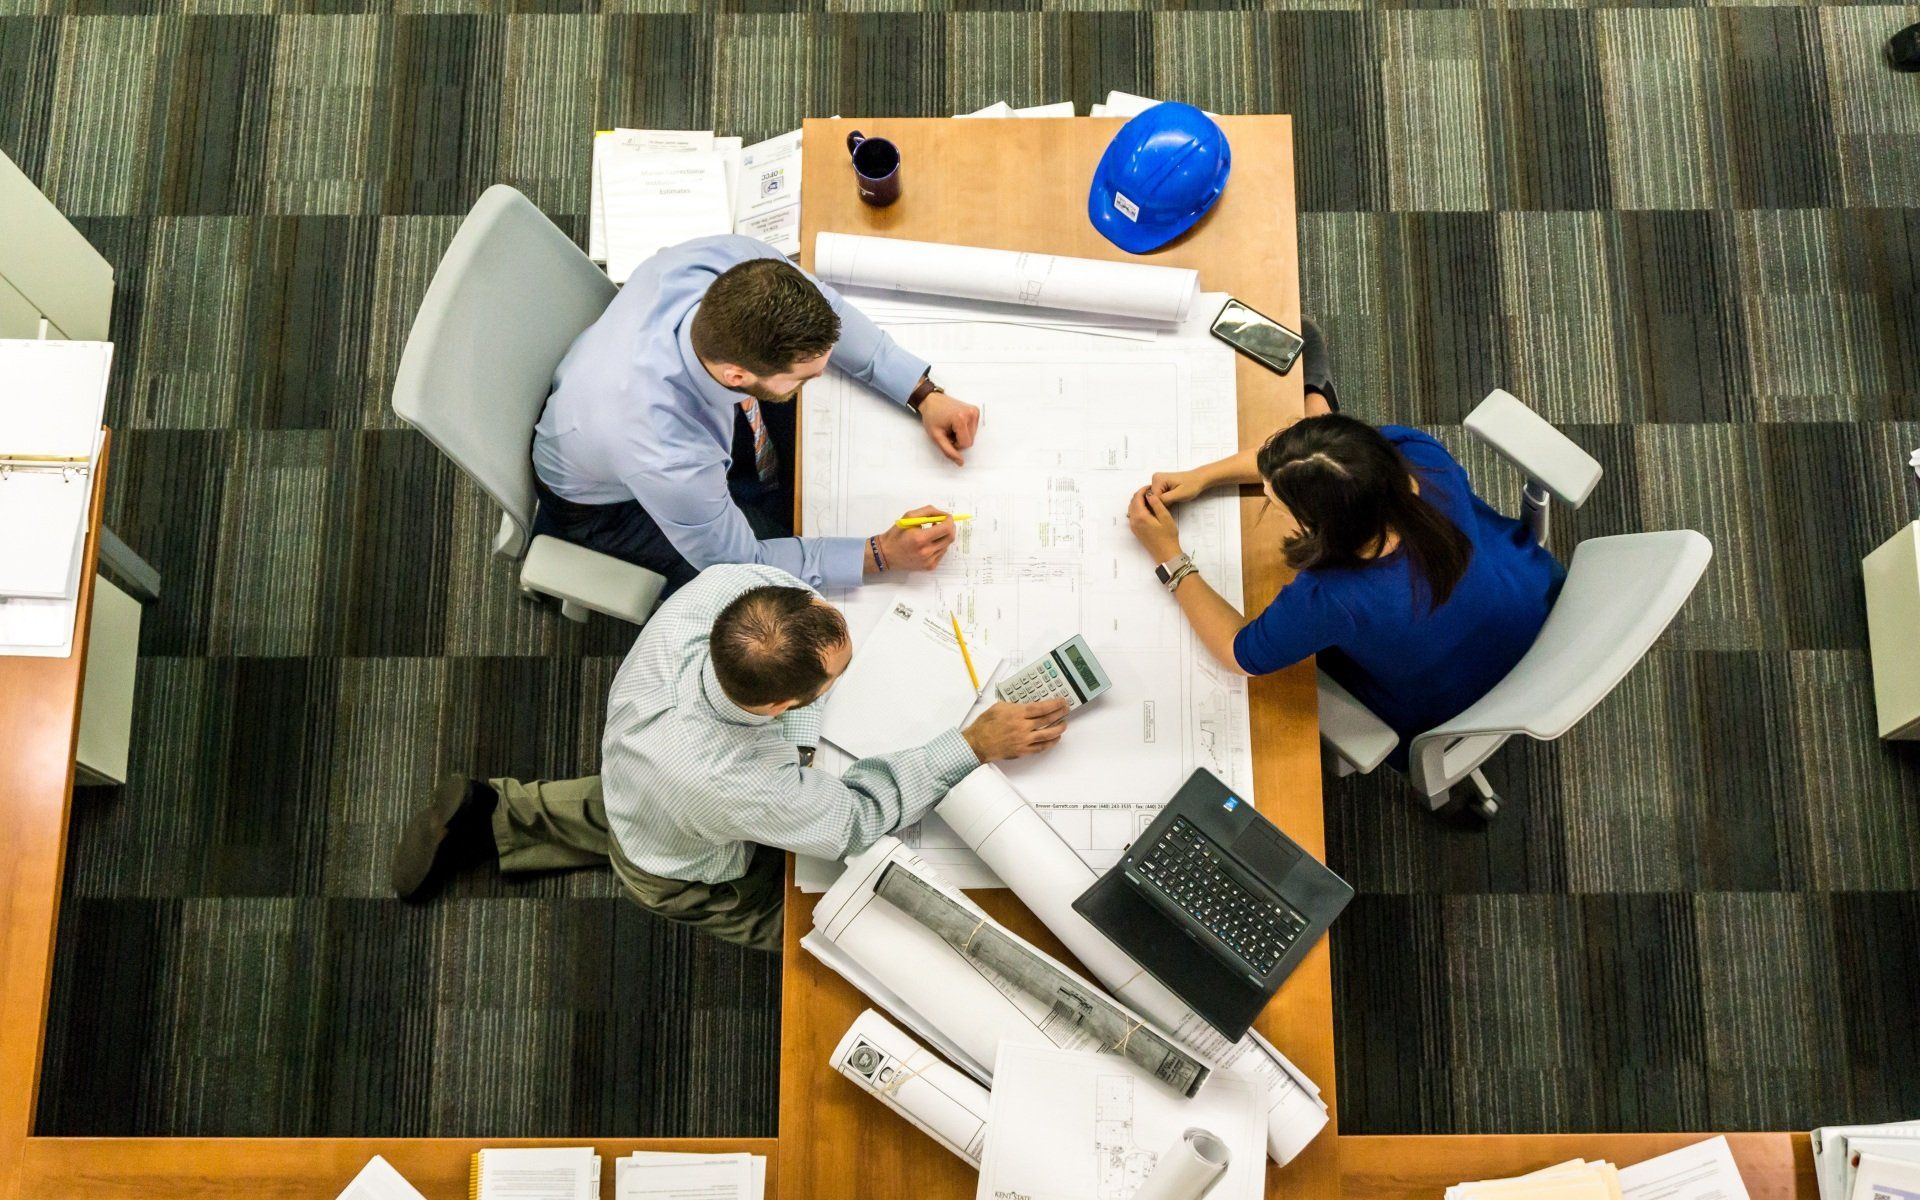 Image looking down from above onto a table with thre people seated around it working on large plans